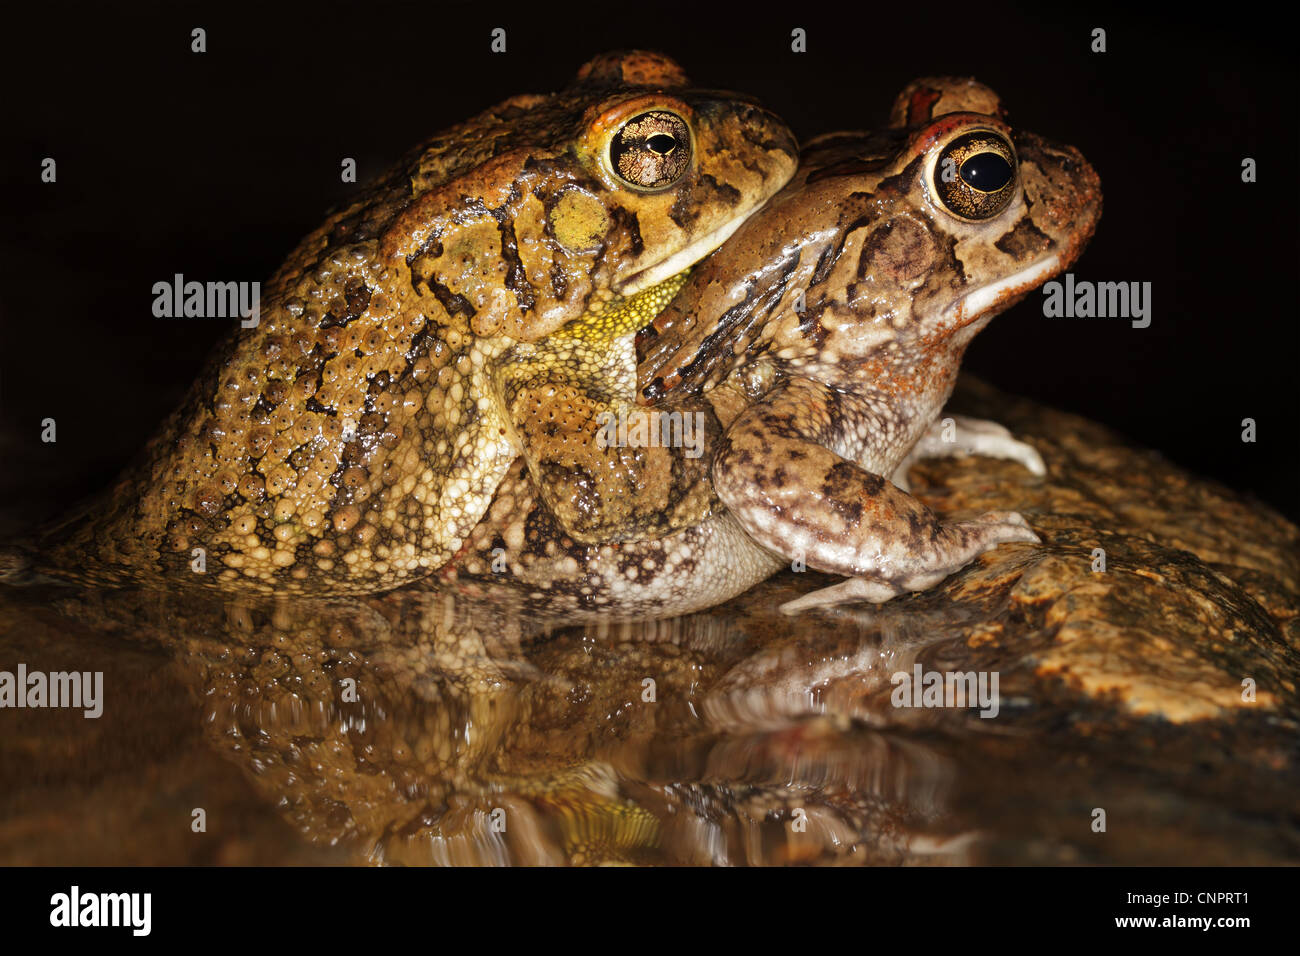 Mating red toads (Amietophrynus gutturalis) in water with reflection, South Africa Stock Photo